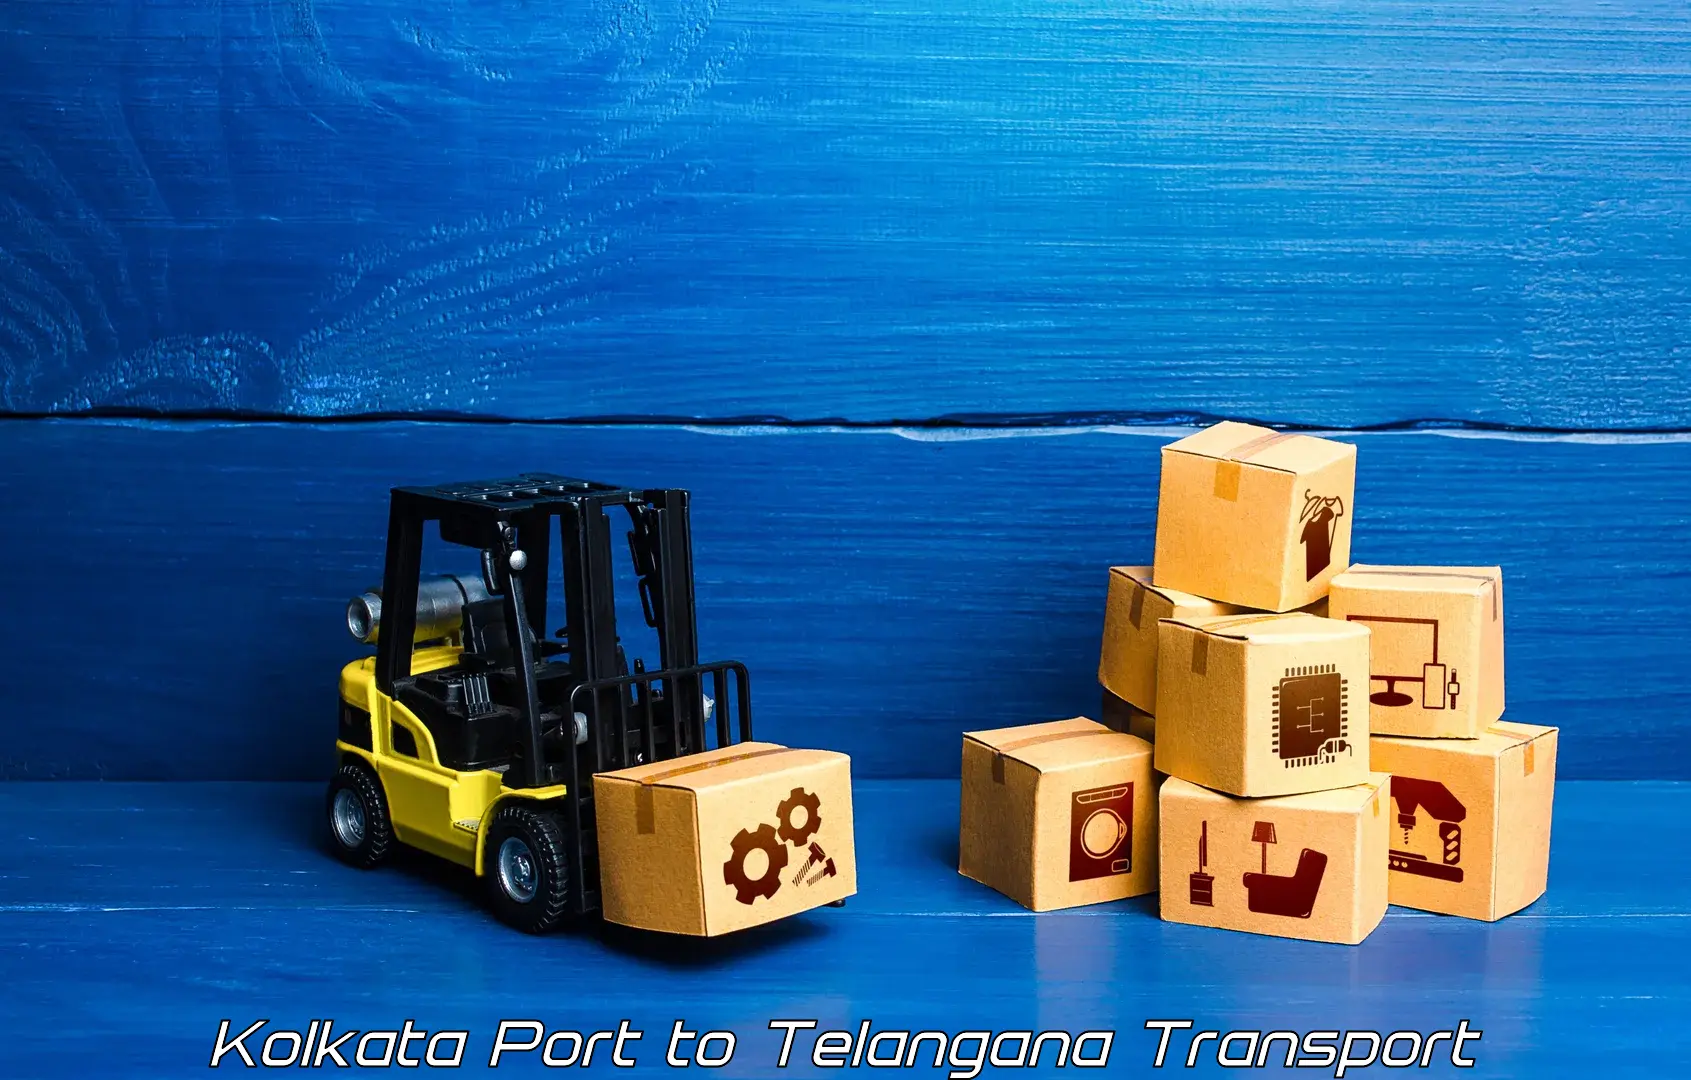 Express transport services in Kolkata Port to Khairatabad